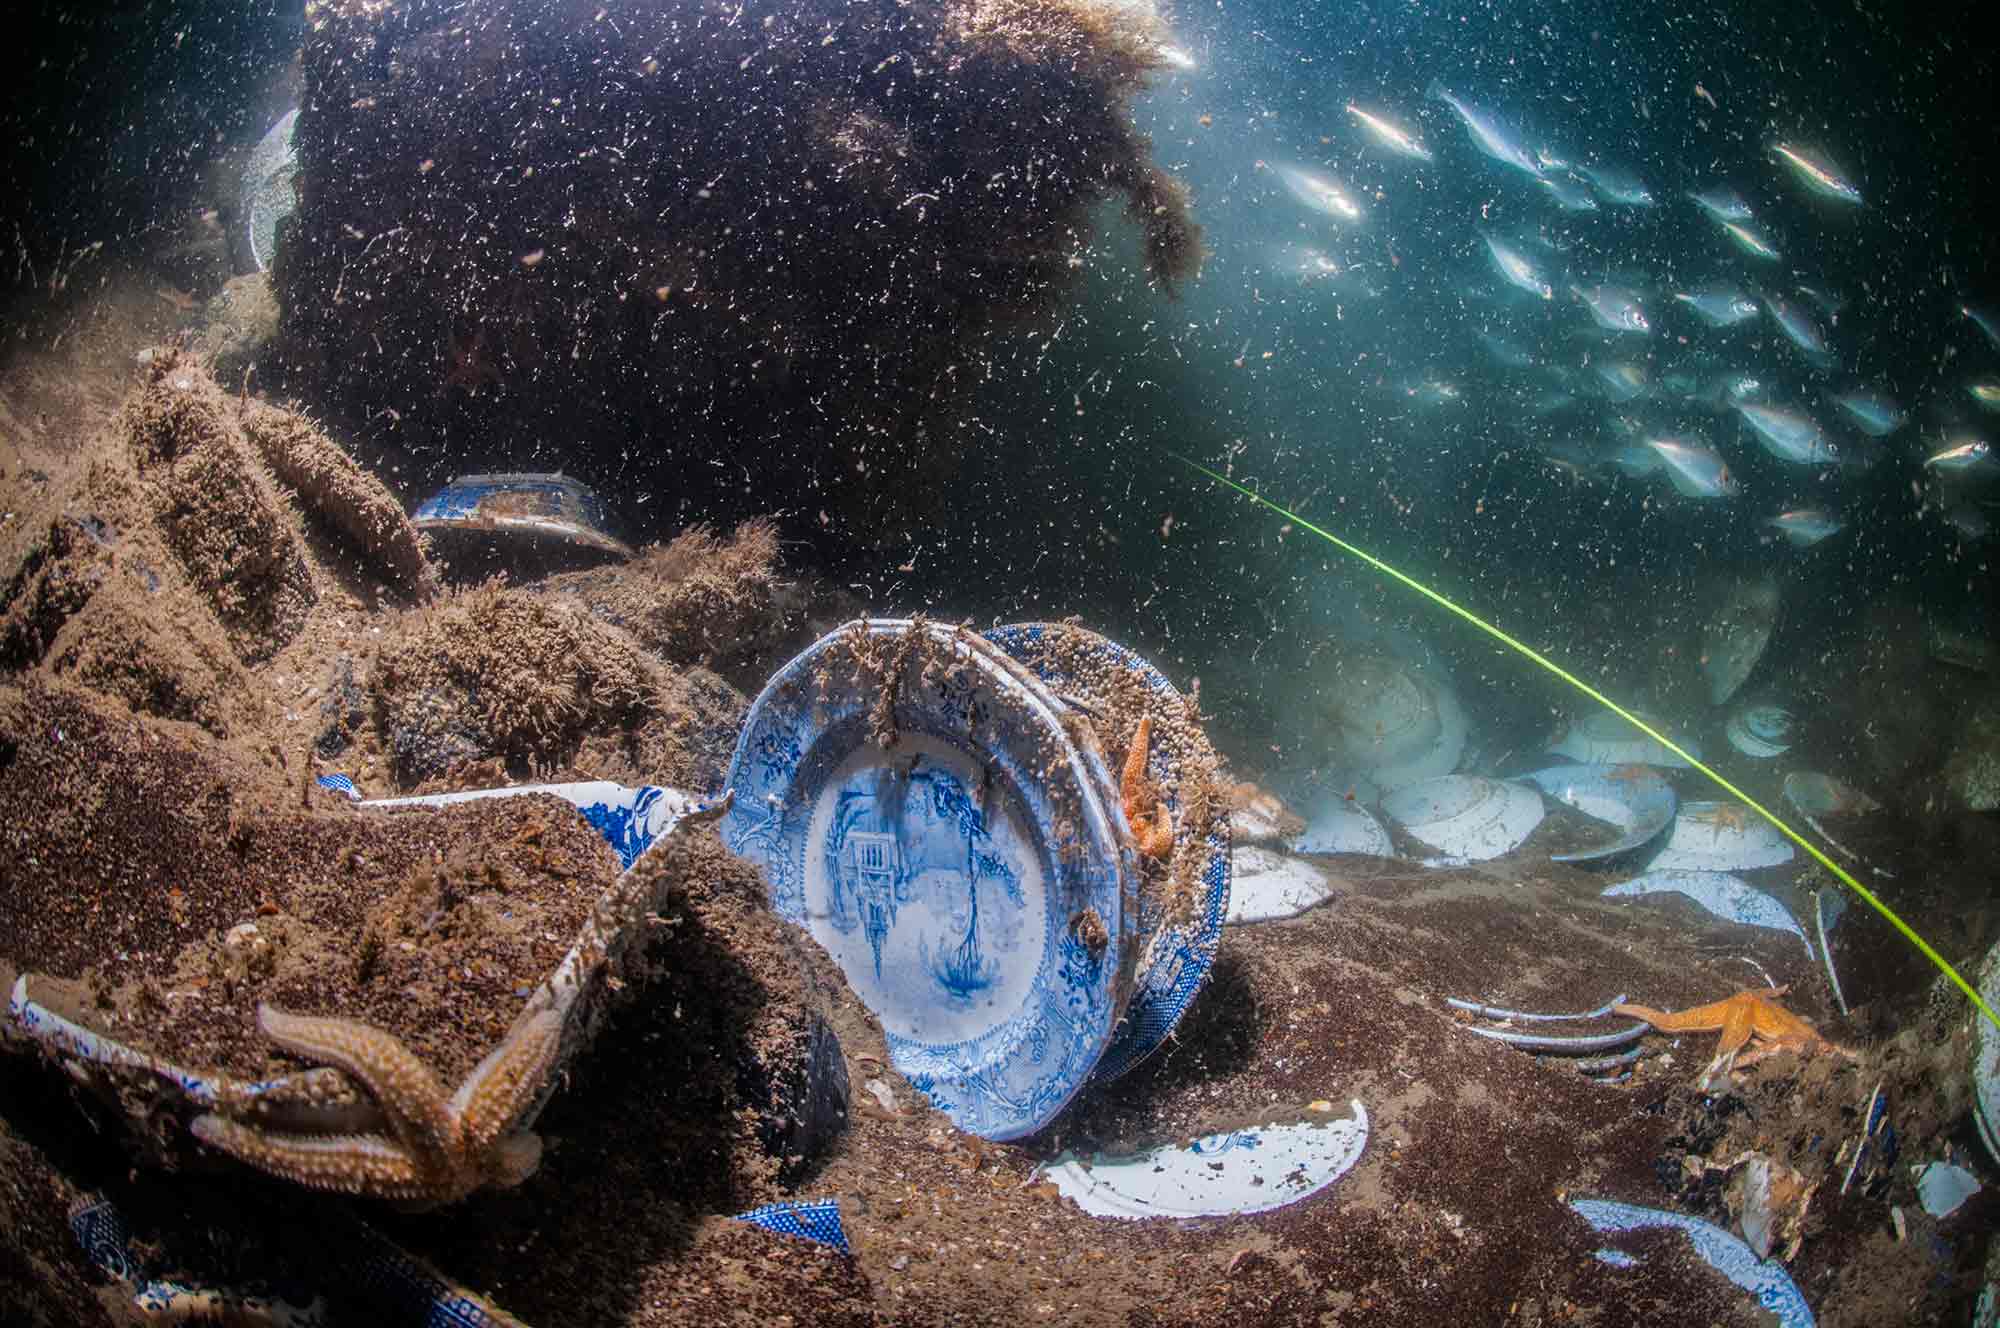 Ceramic plates on the seabed with starfish clinging to them and a shoal of fish in the background